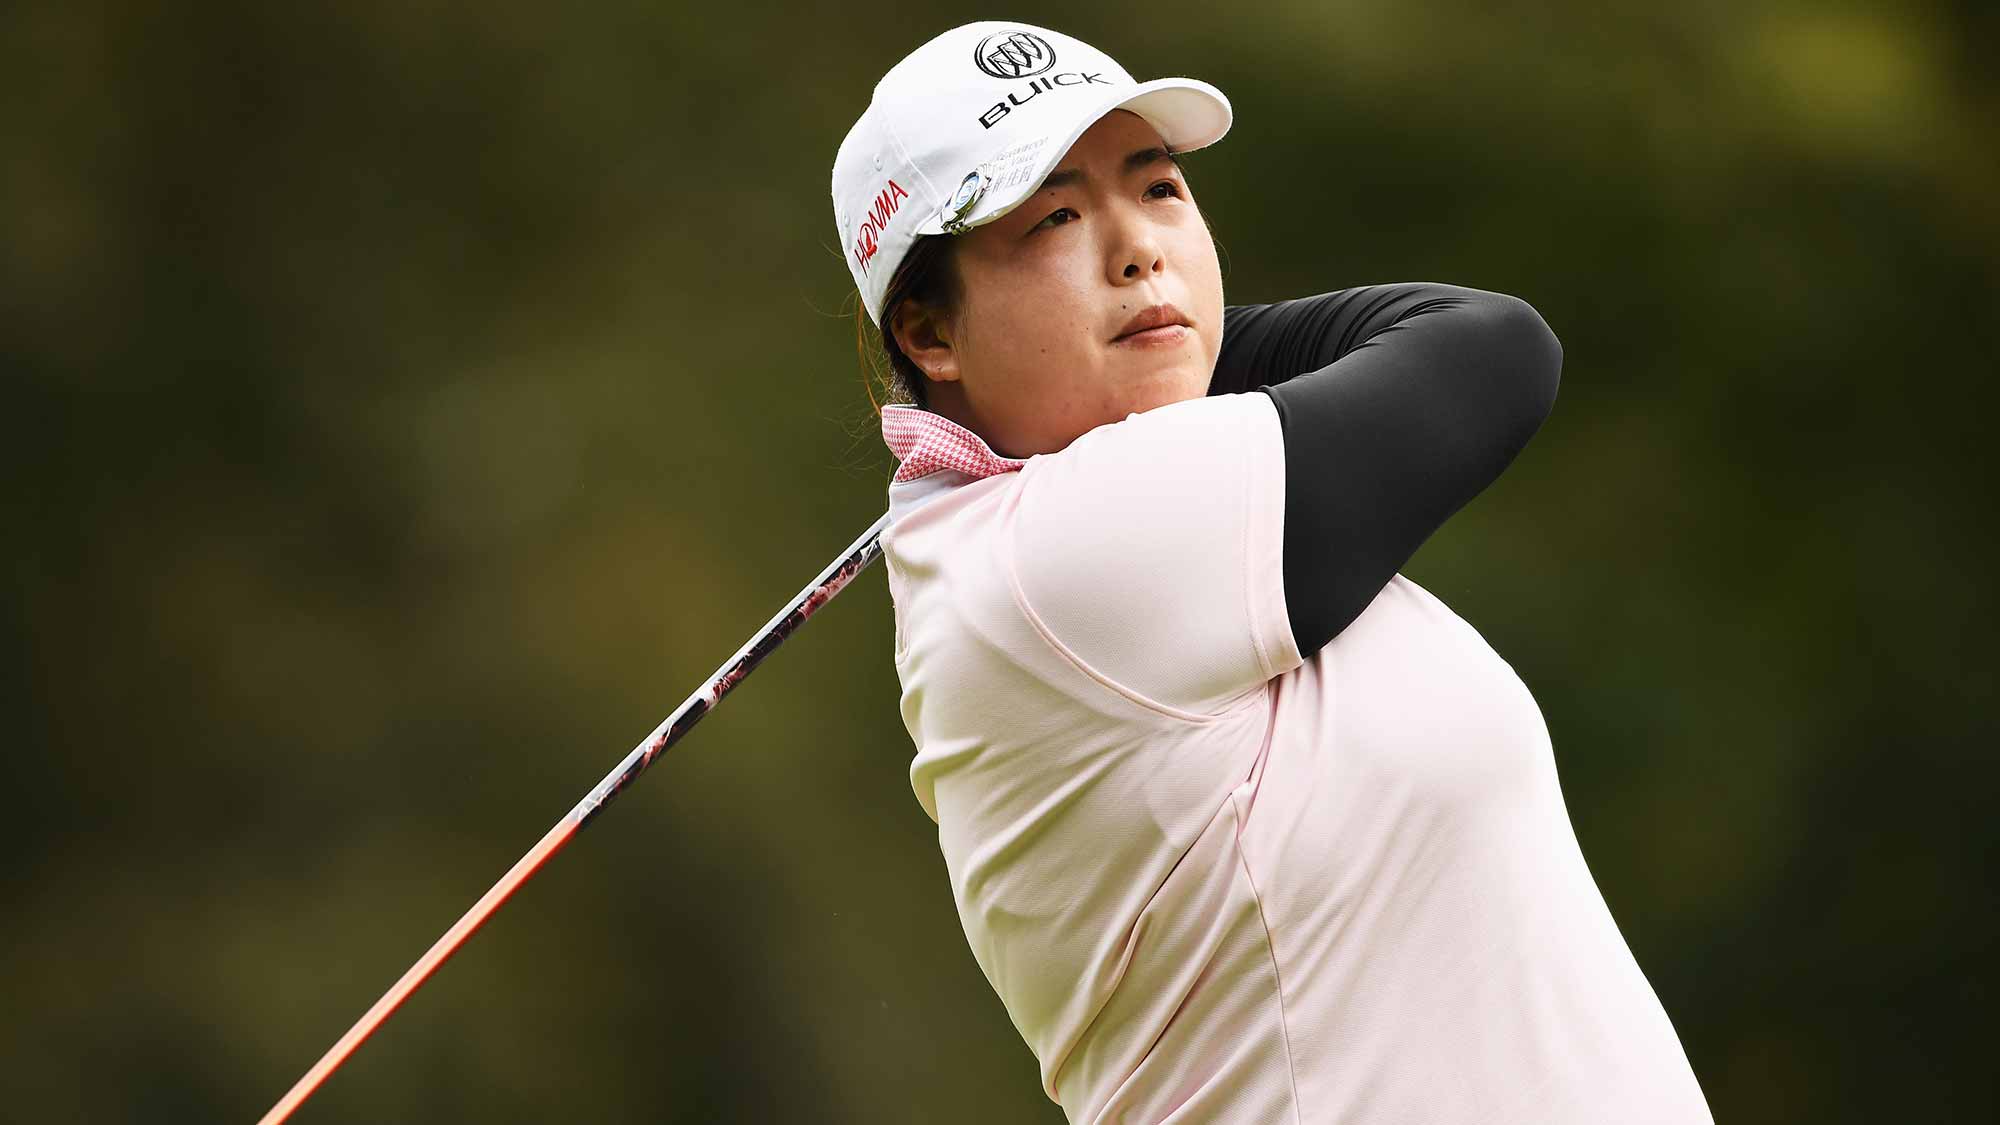 Shanshan Feng of China plays a shot during the third round of The Evian Championship